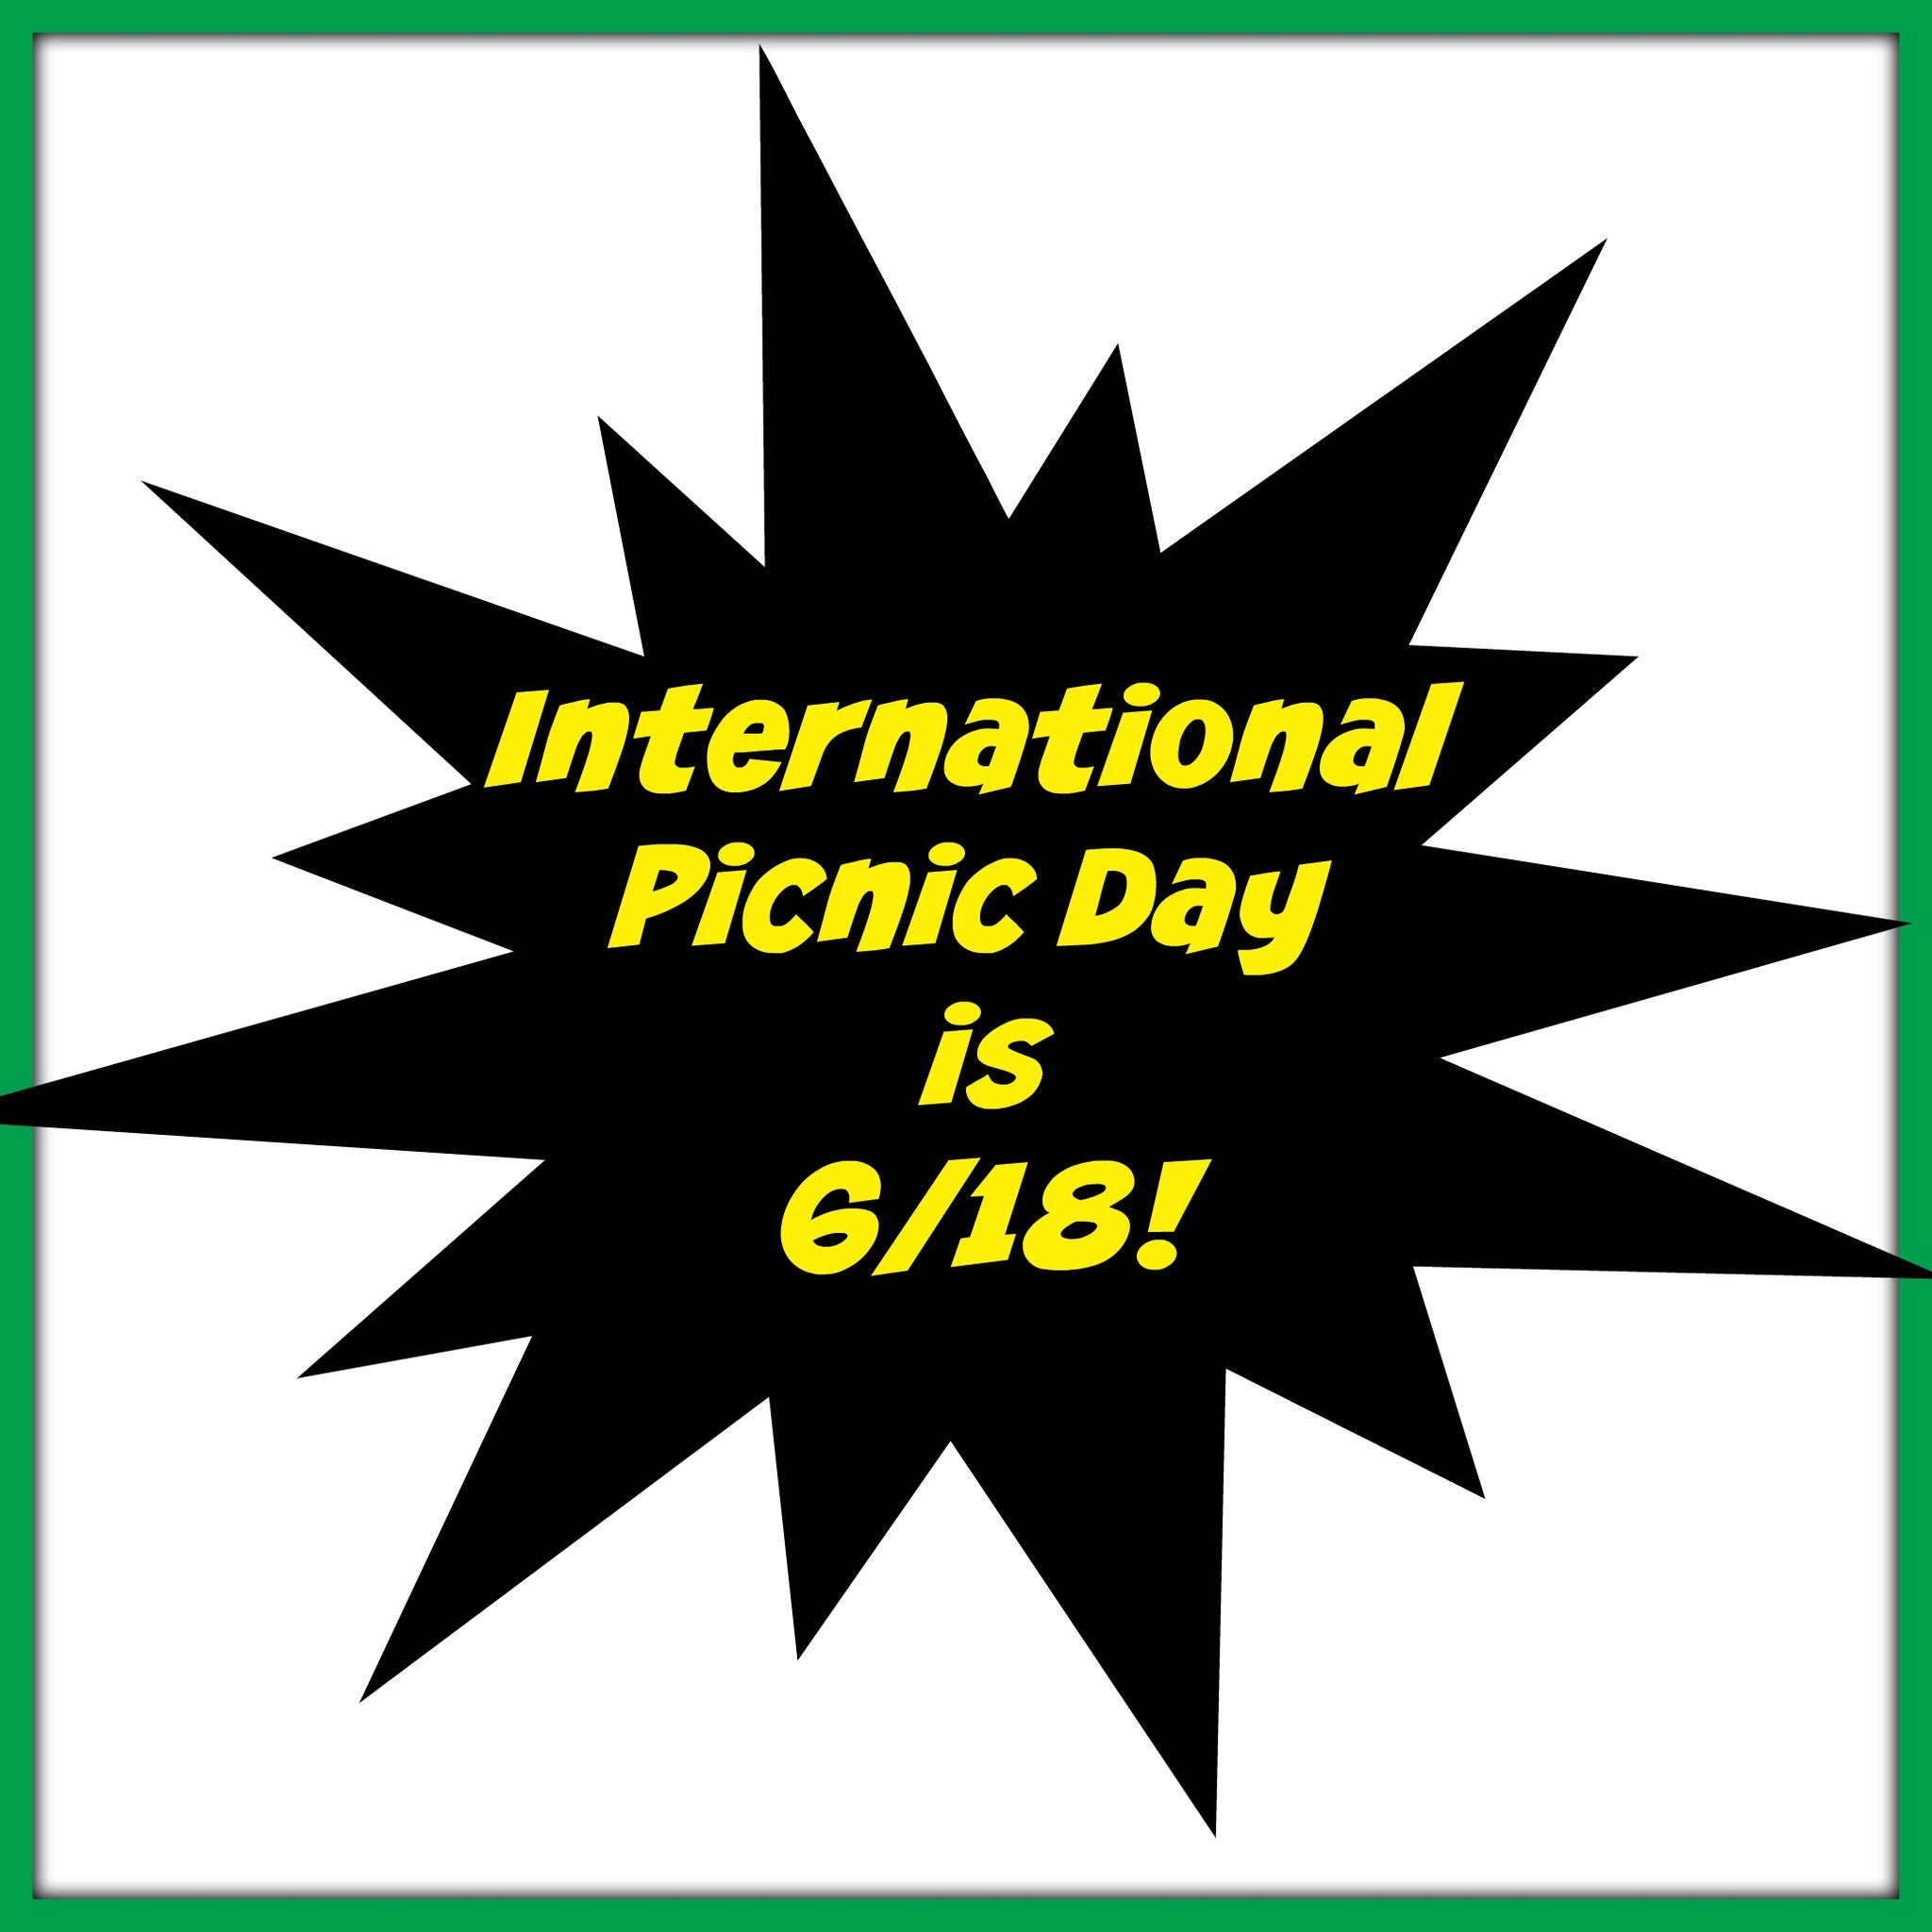 International Picnic Day is 6/18!